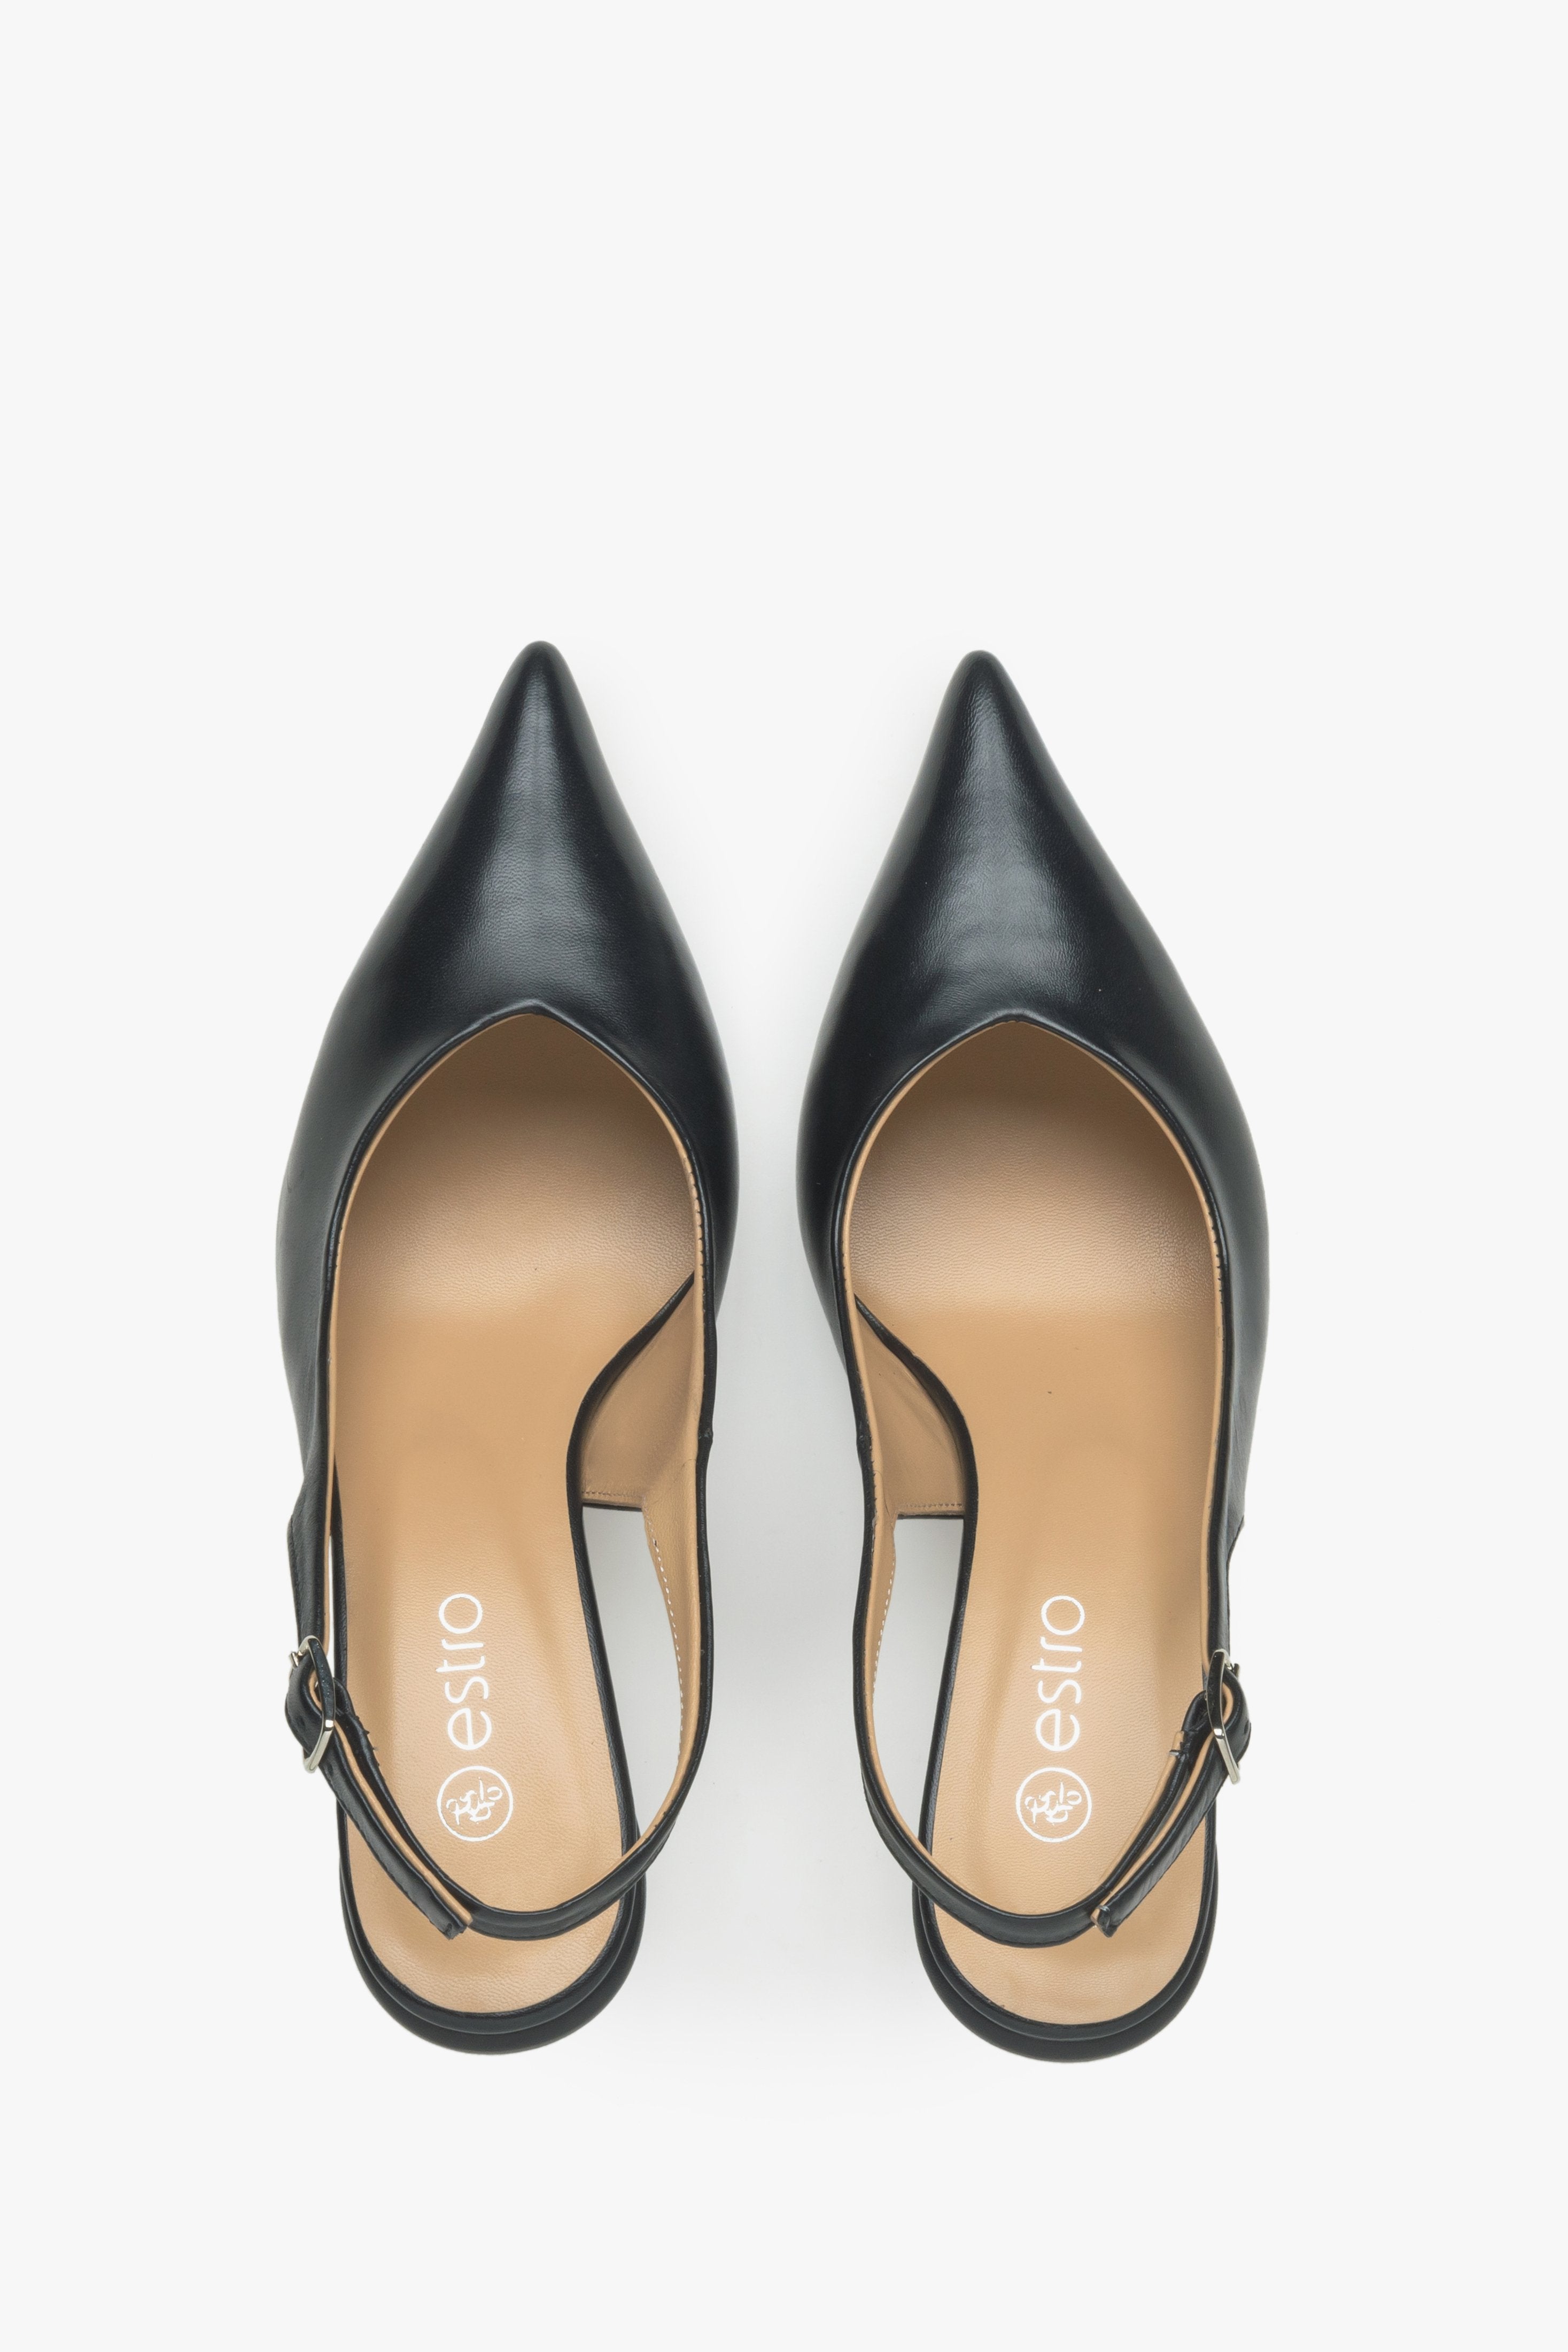 Women's black leather slingback pumps - top view presentation of the model.